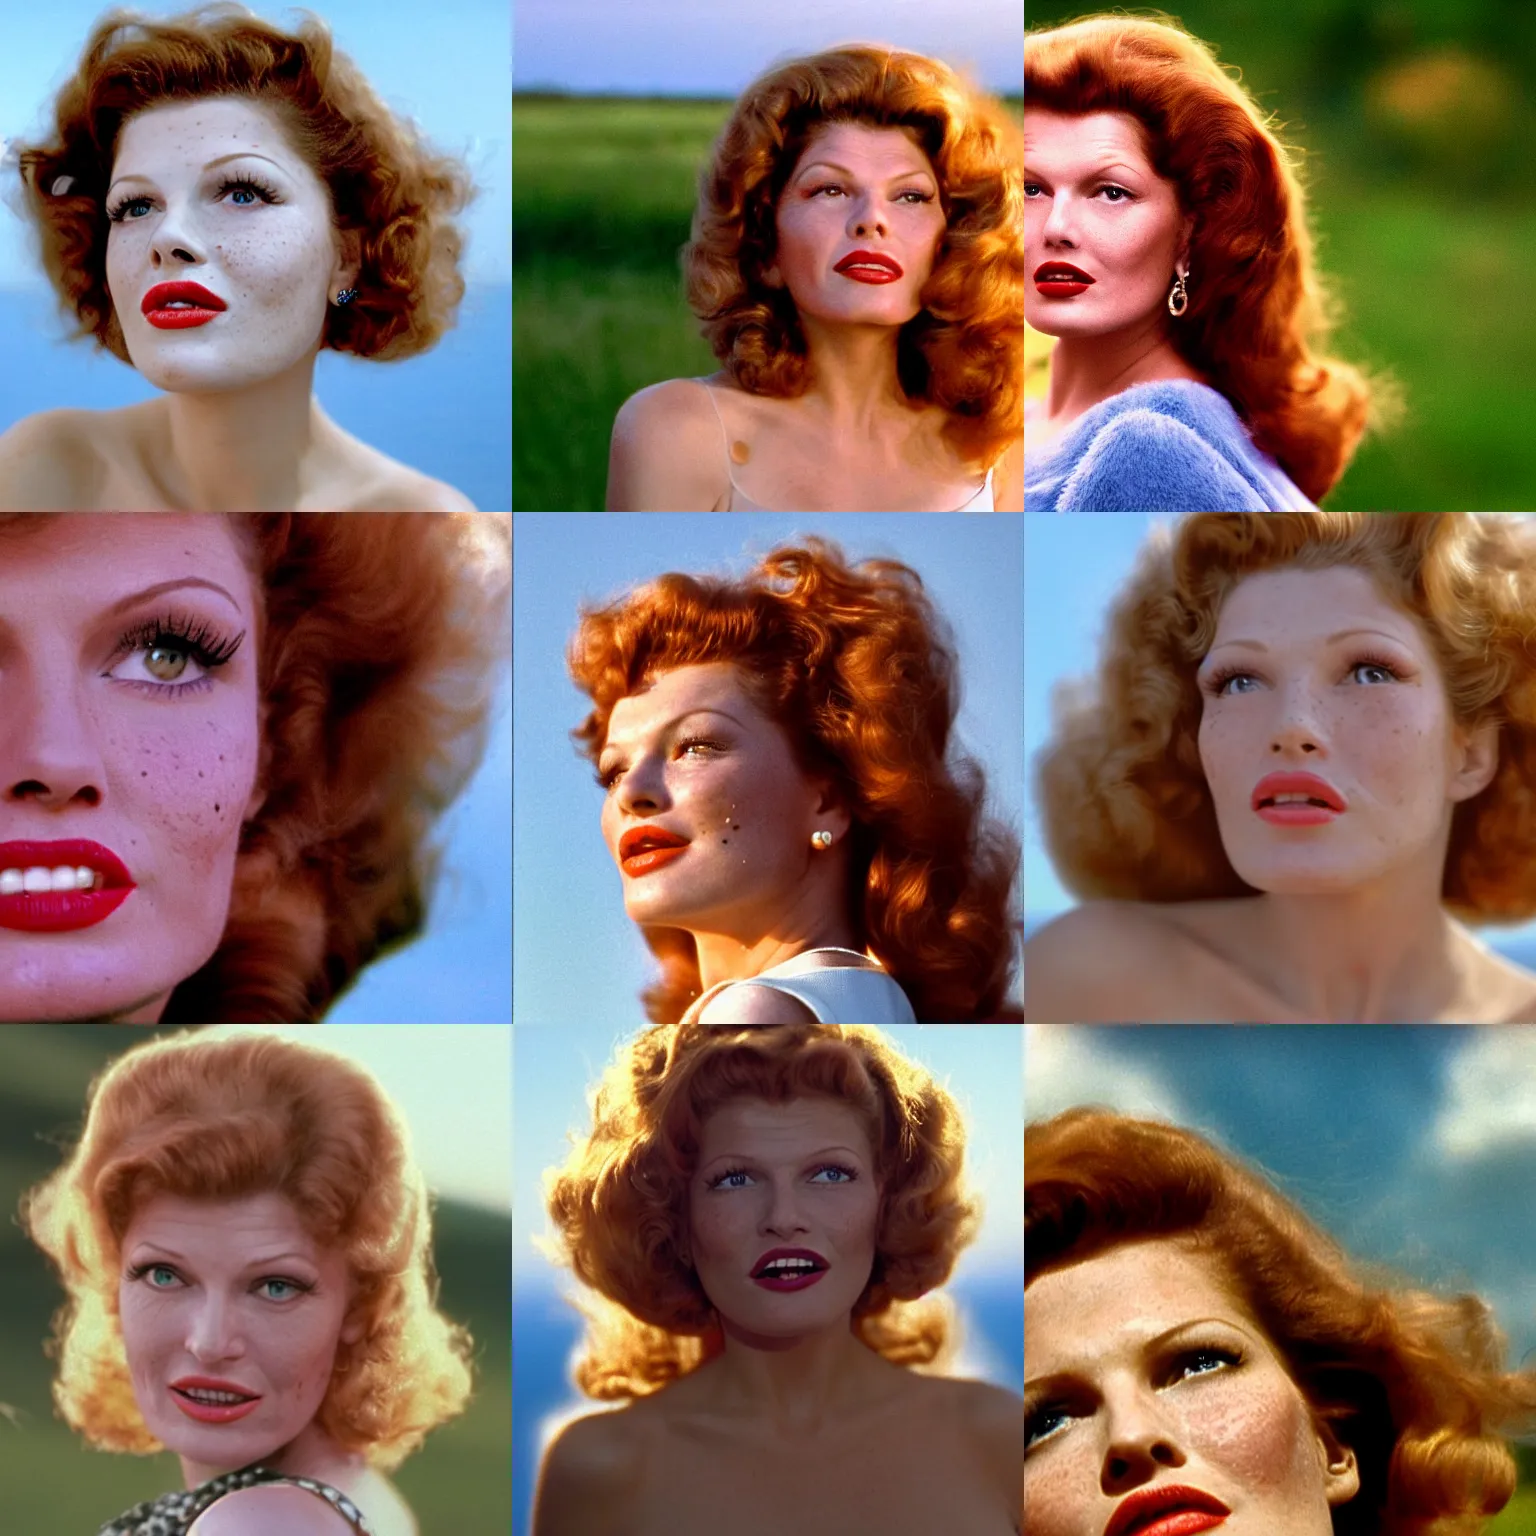 Prompt: natural 8 k close up shot from a 2 0 0 5 romantic comedy by sam mendes of rita hayworth with natural face, freckles, natural skin, beauty spots and very small lips. she stands and looks on the horizon with winds moving her hair. fuzzy blue sky in the background. small details, natural lighting, 8 5 mm lenses, sharp focus